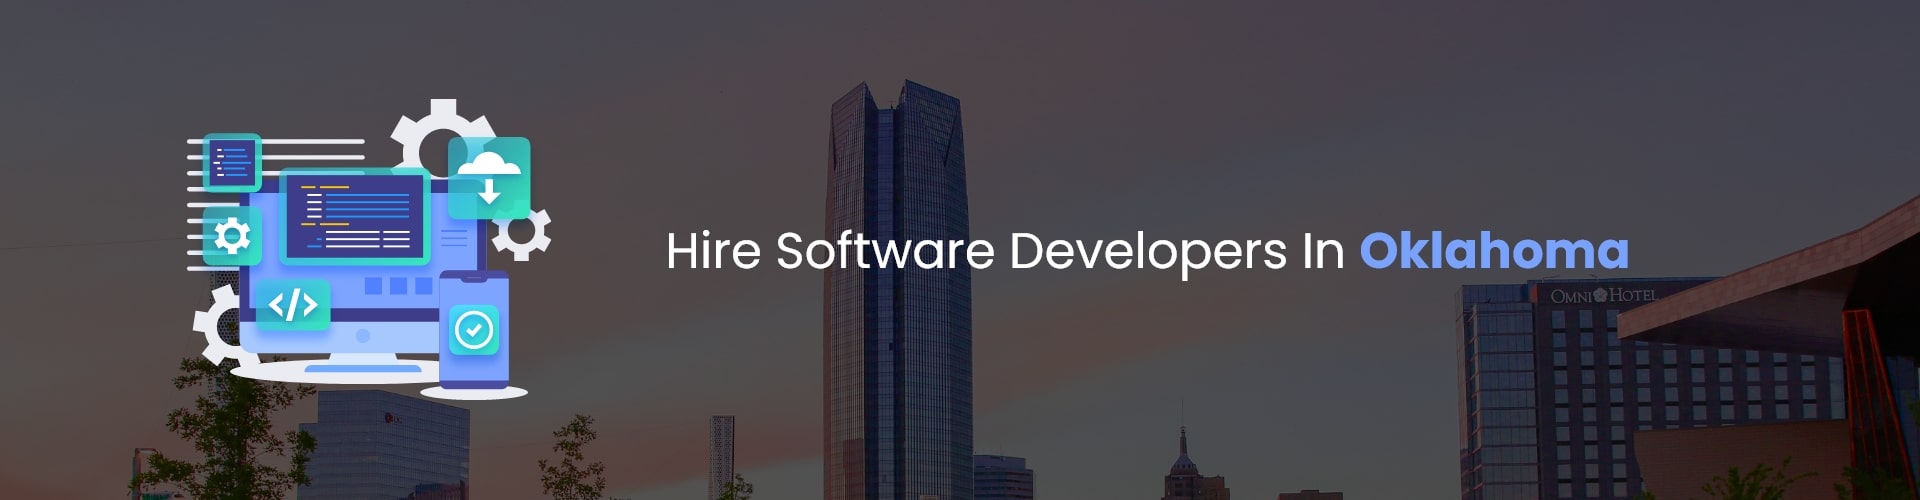 hire software developers in oklahoma